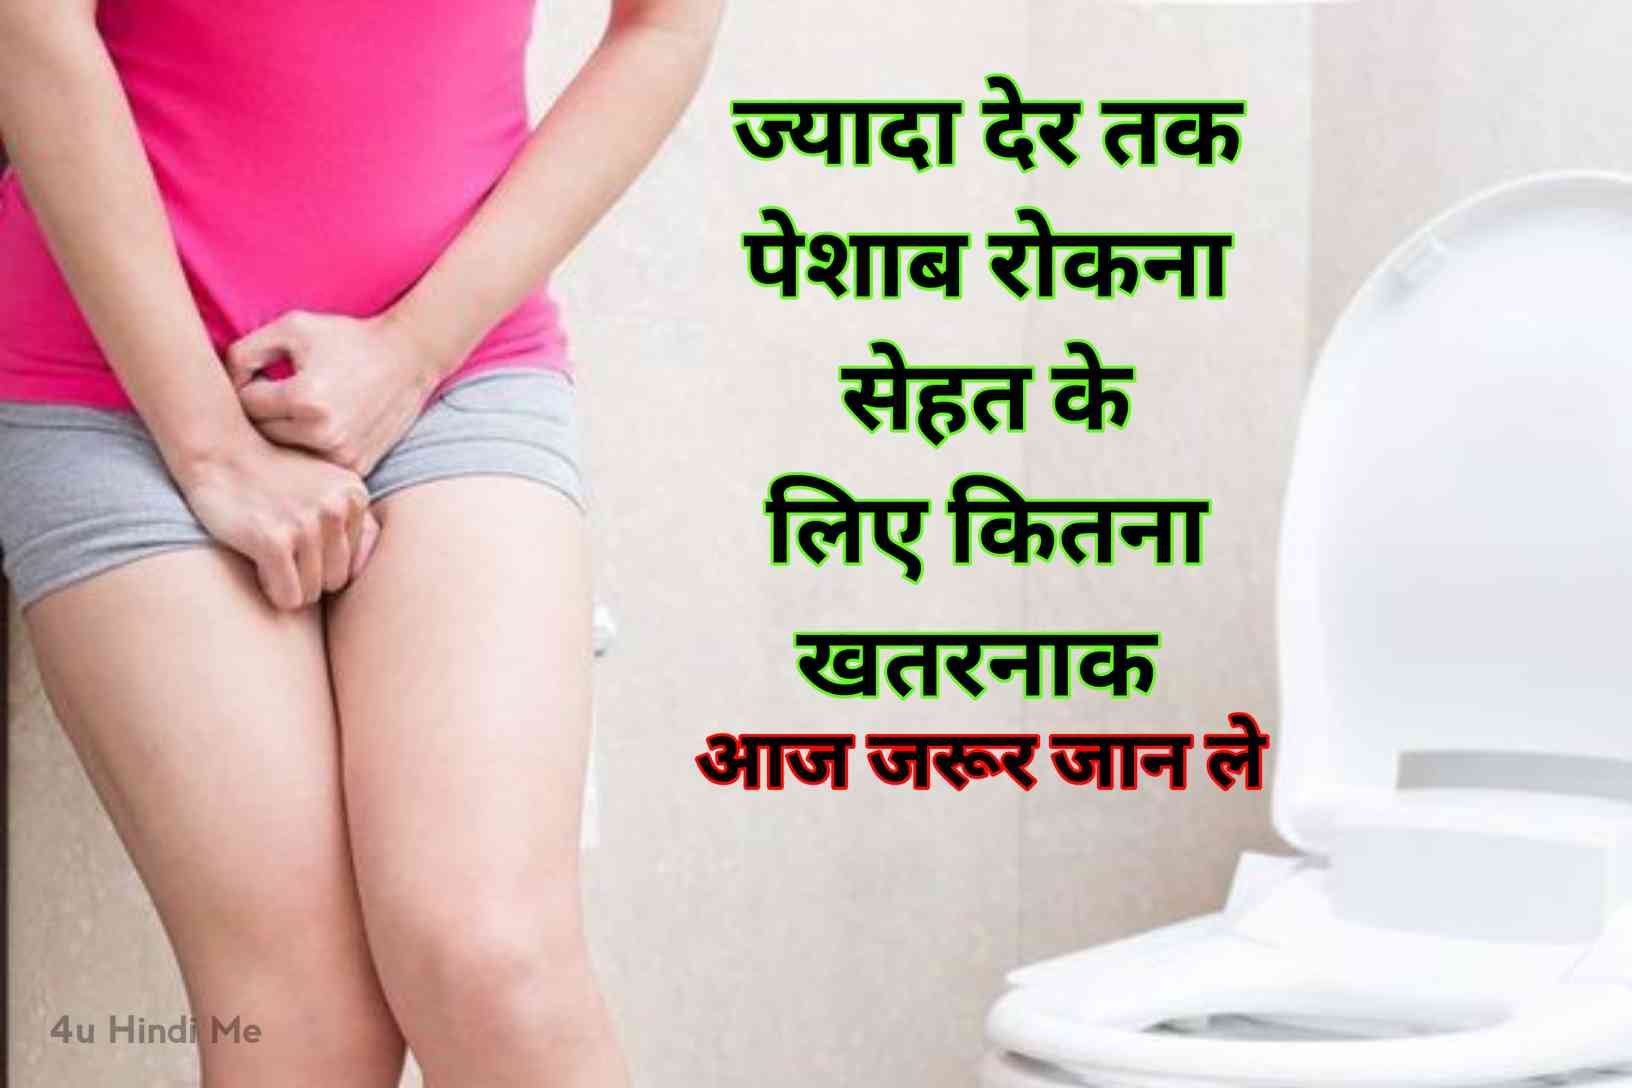 Holding urine for a long time is harmful for health & Disadvantages of holding urine